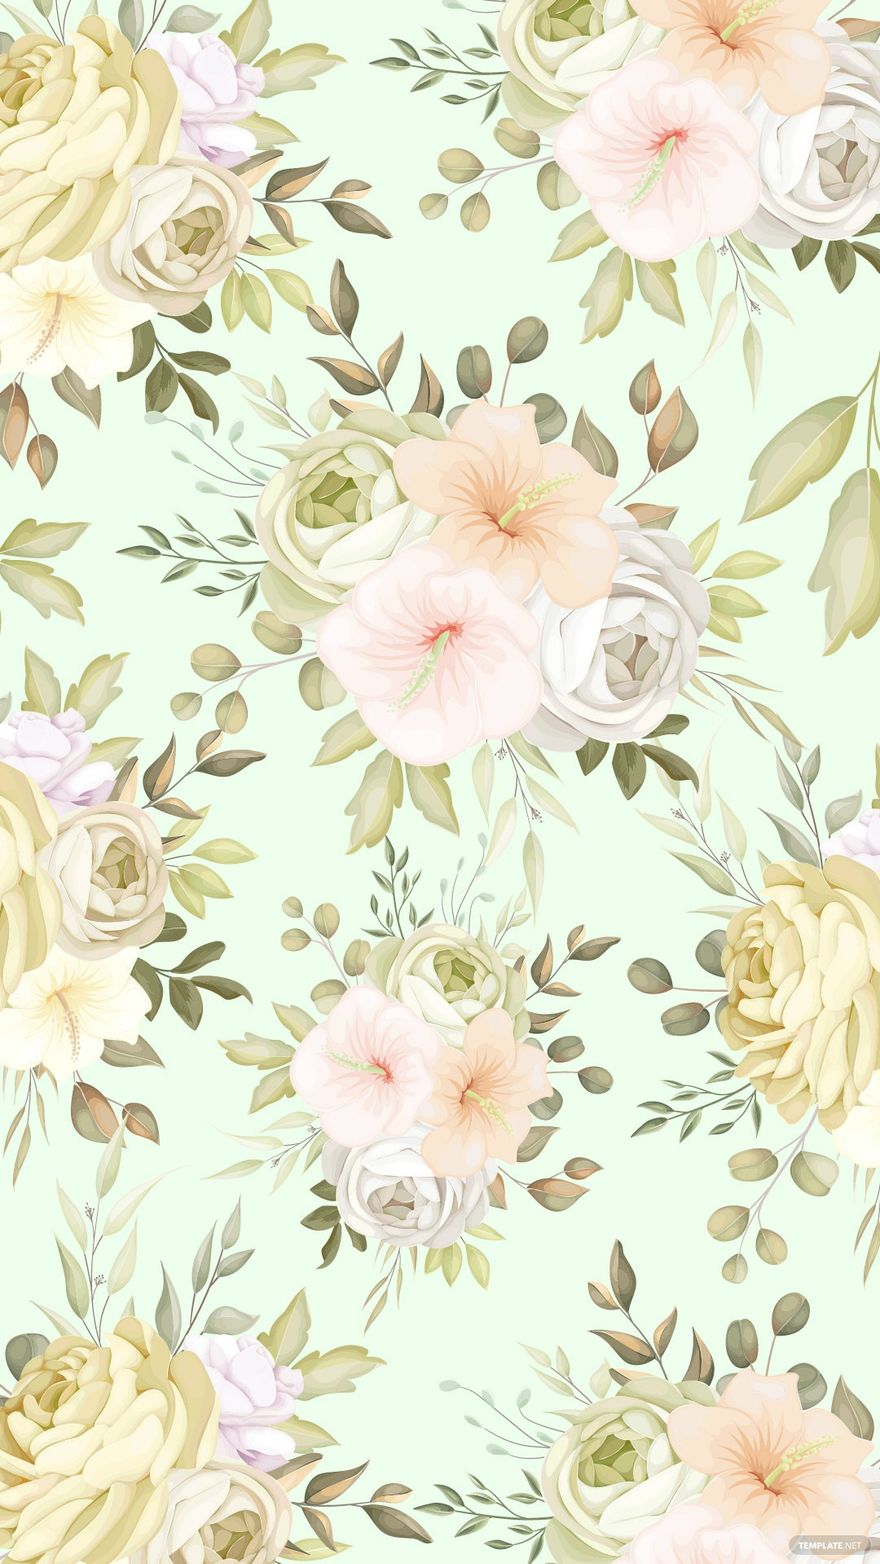 Fall Floral Watercolor Background in Illustrator, EPS, SVG, JPG